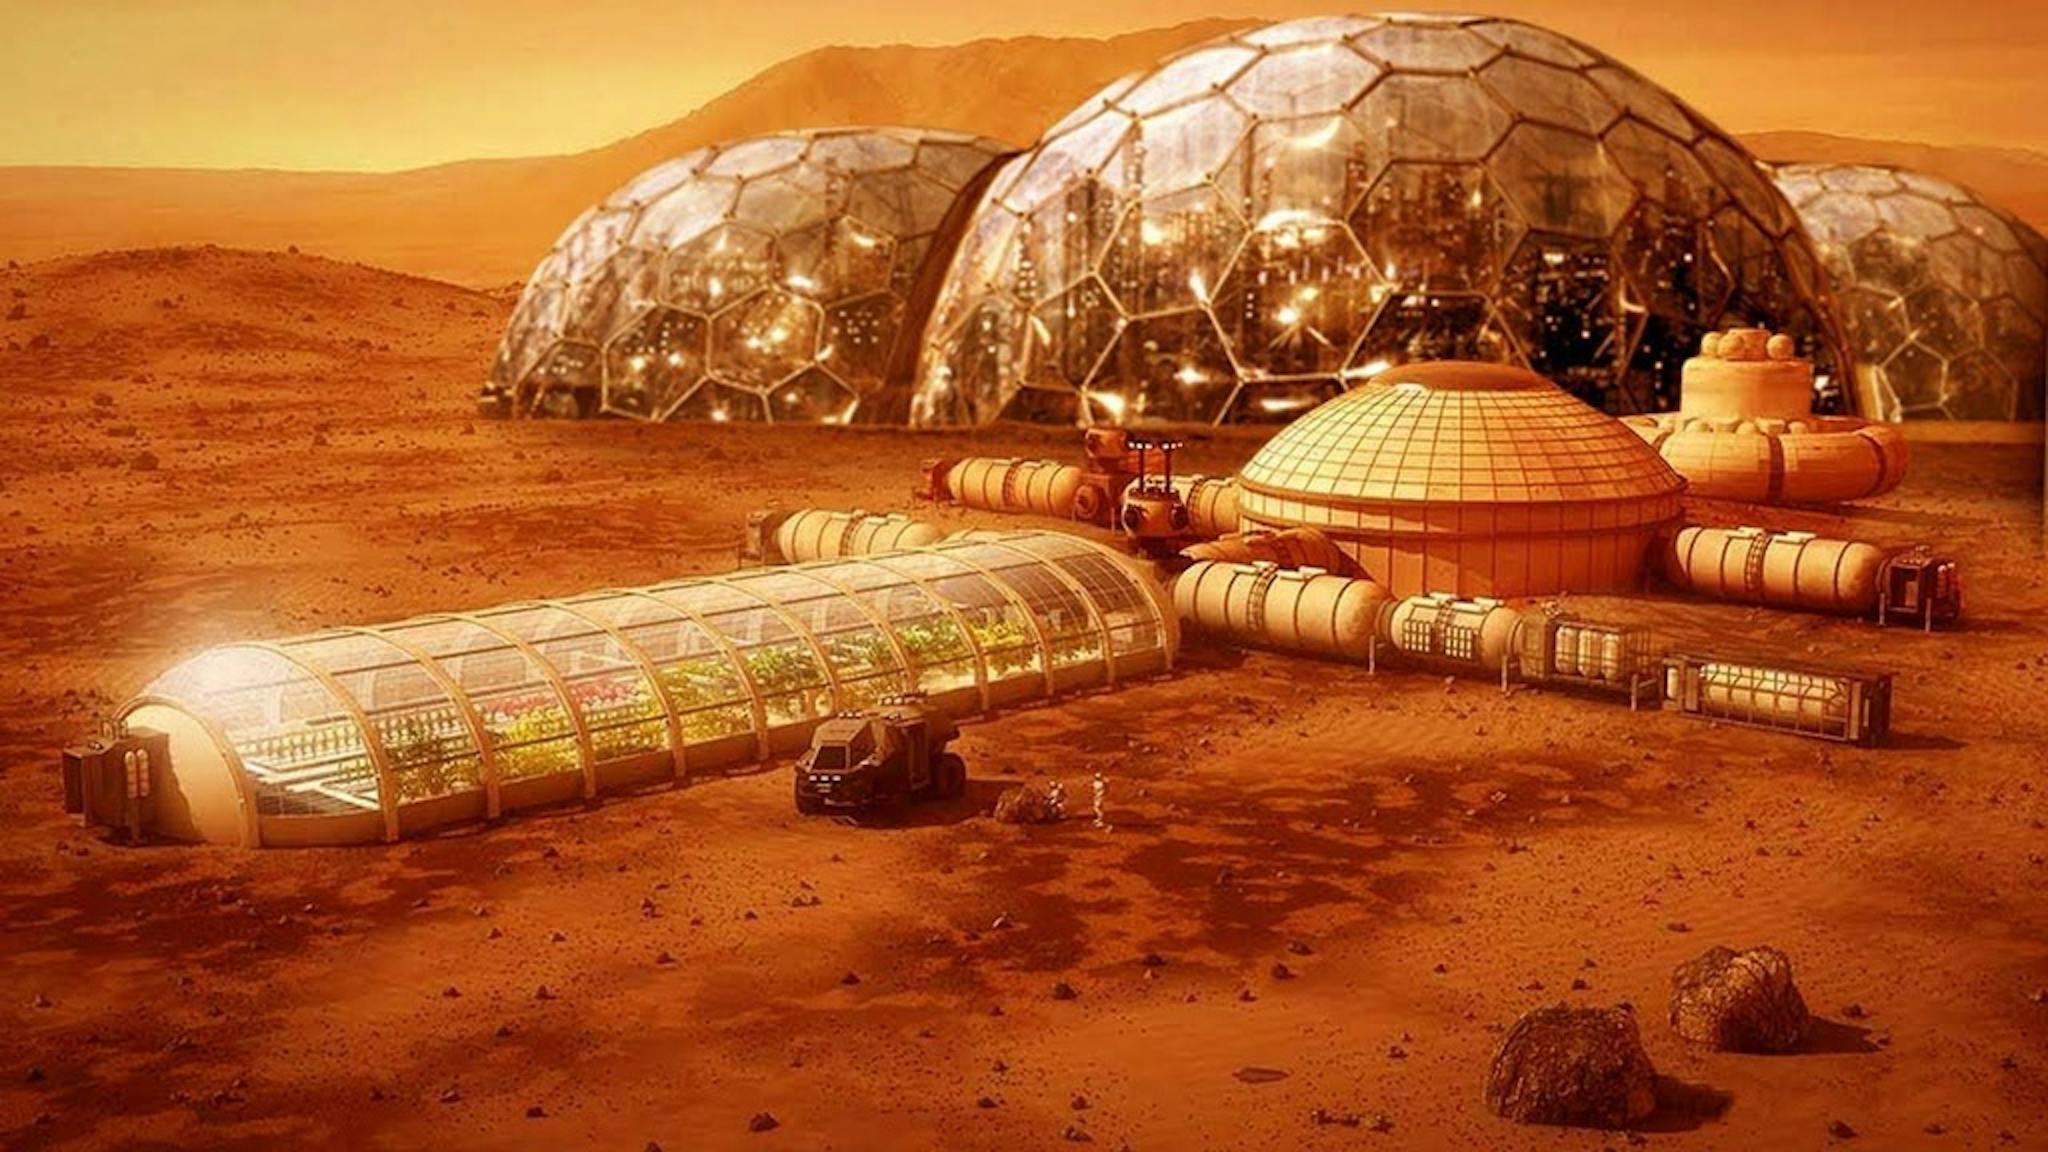 Mars in the Metaverse - where people can experience life on another planet when staying on Earth